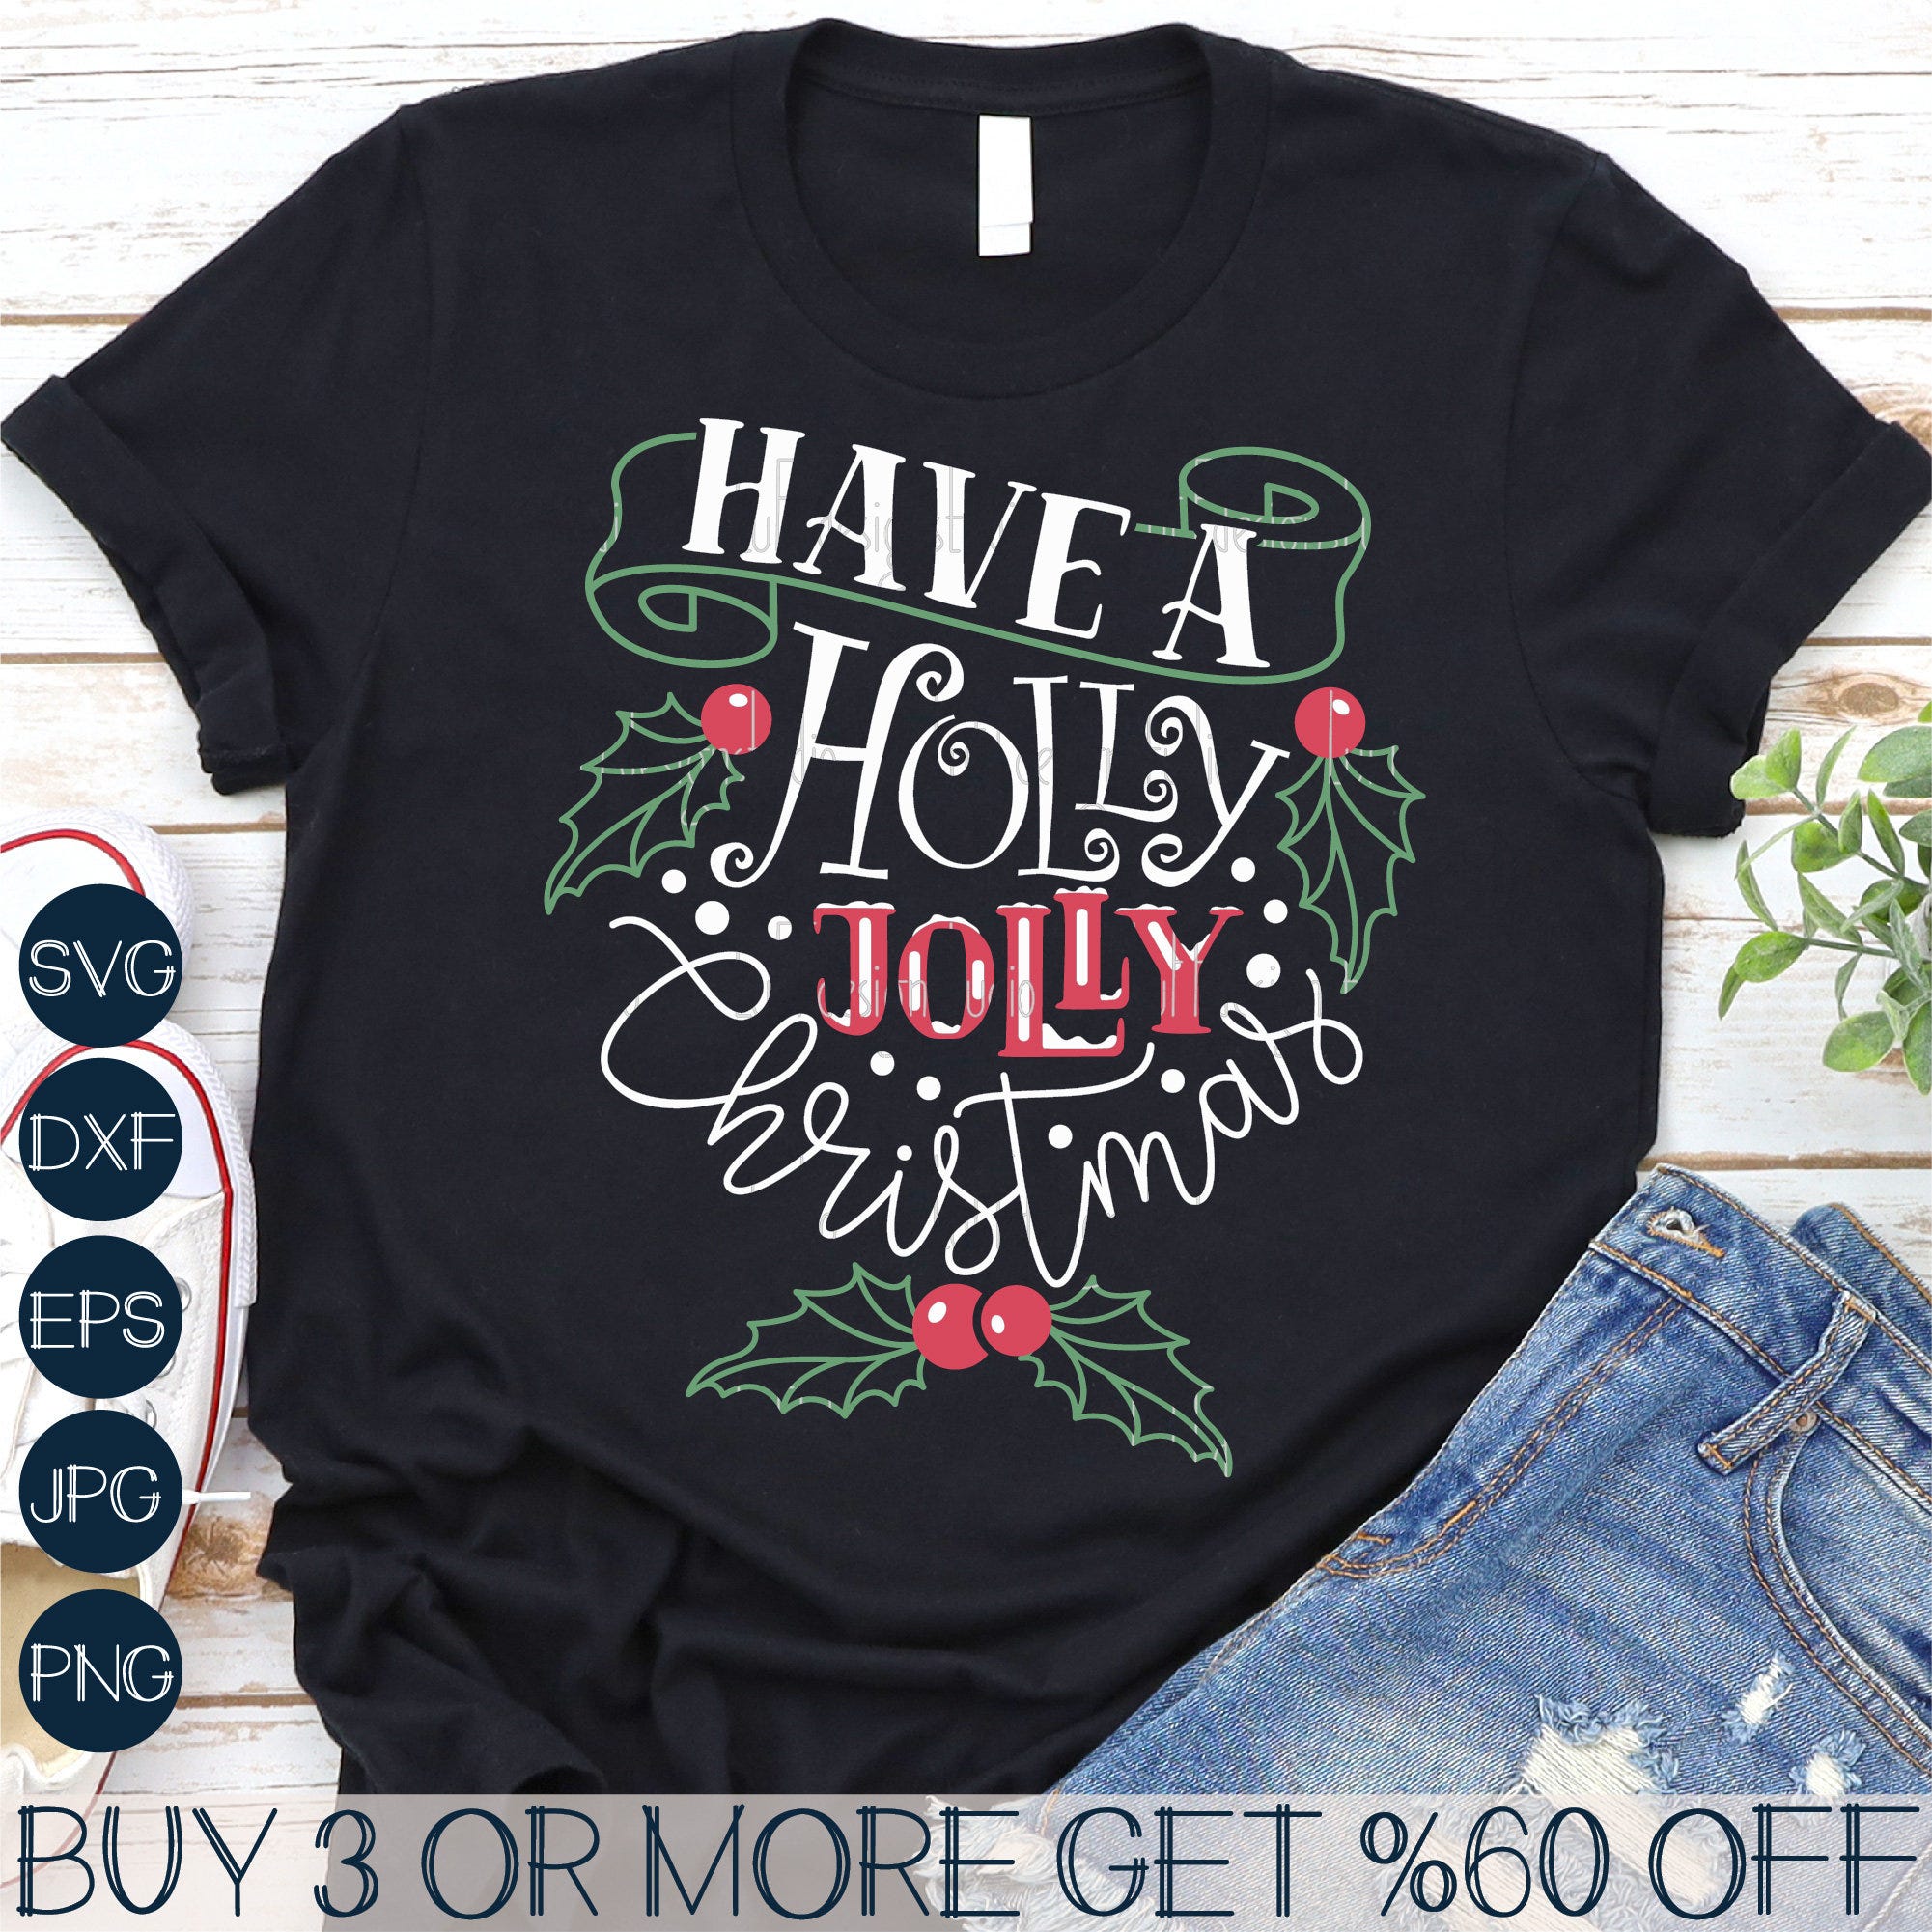 Holly Jolly Christmas SVG, Merry Christmas SVG, Christmas Shirt SVG, New Years Png, Svg Files For Cricut, Sublimation Designs Downloads